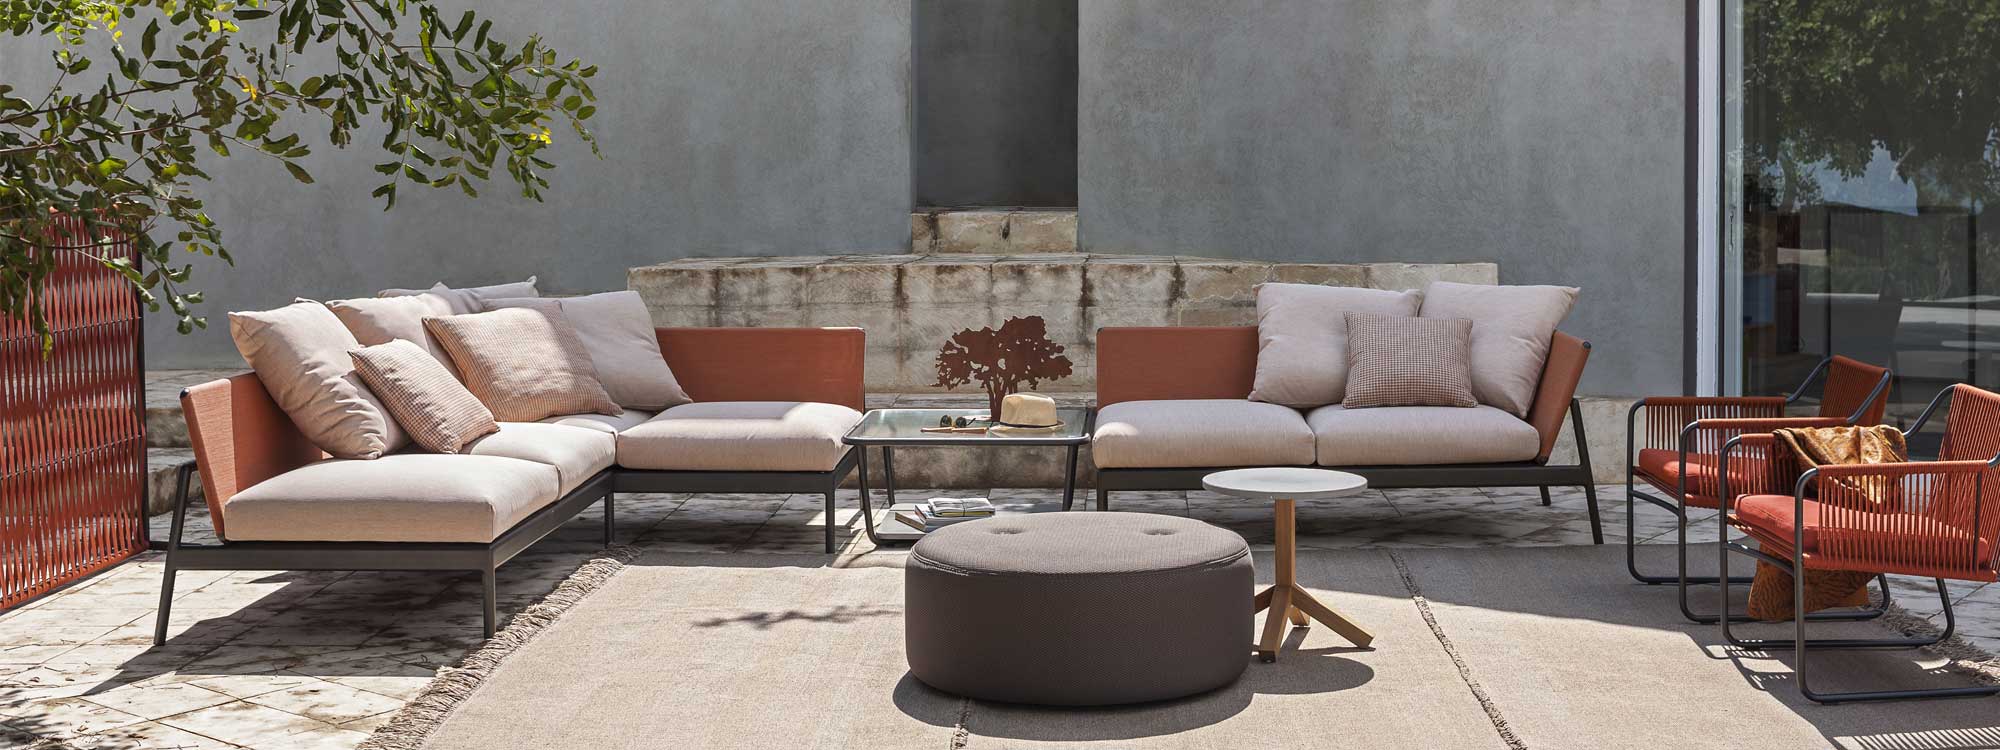 Piper modern garden corner sofa and Harp outdoor lounge chairs in vibrant orange, shown with Double outdoor pouf and Root exterior low table